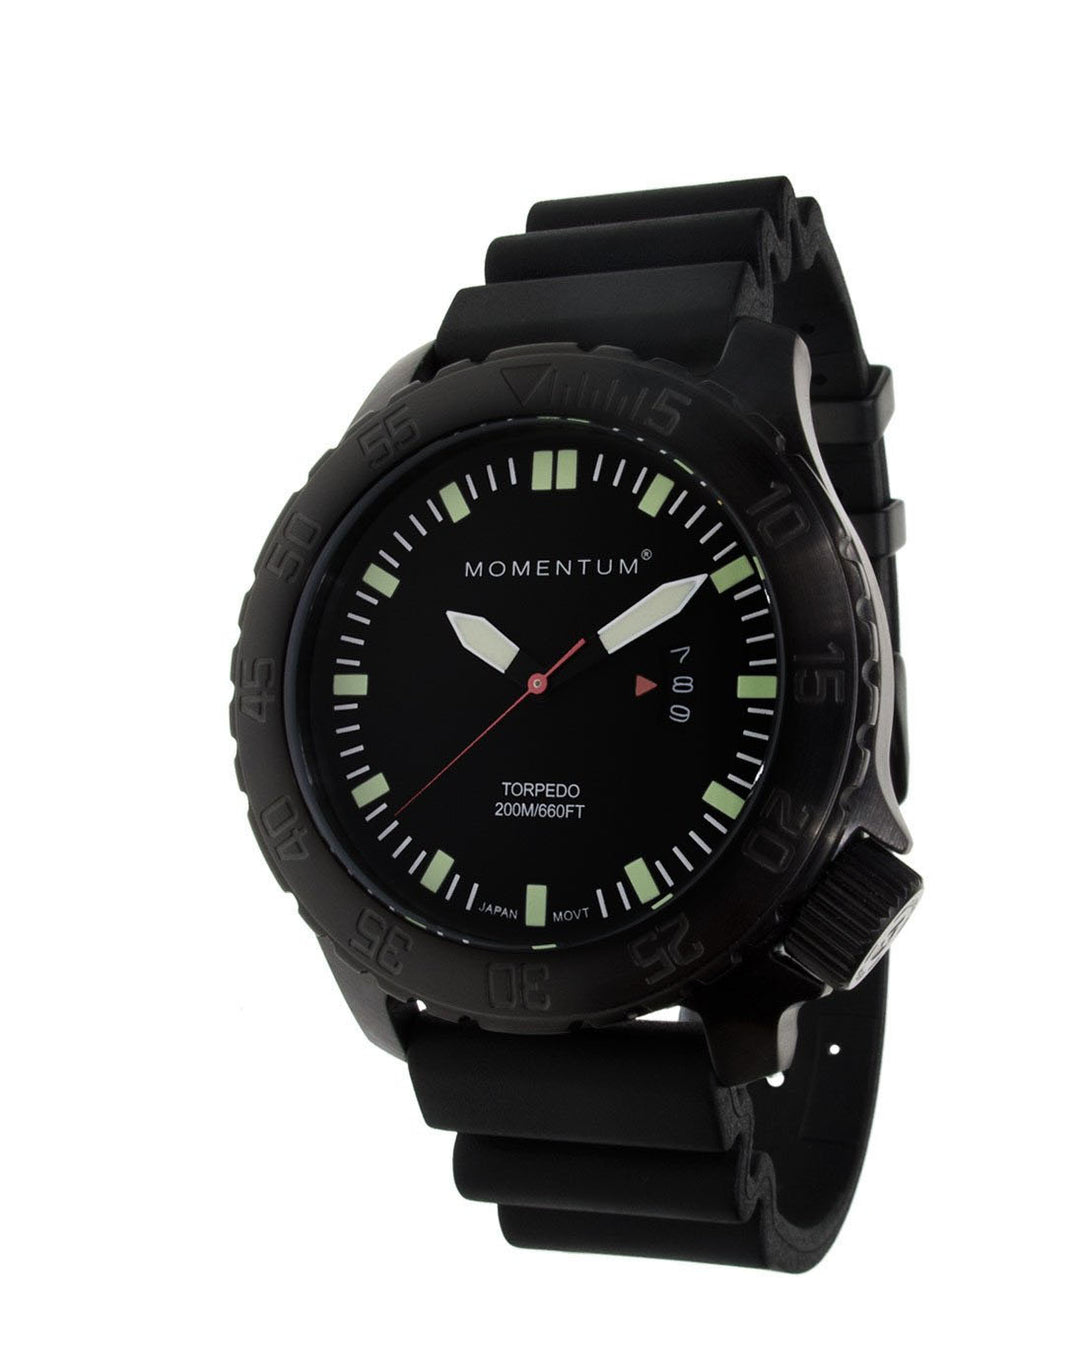 Momentum Torpedo Black-Ion with Rubber Strap